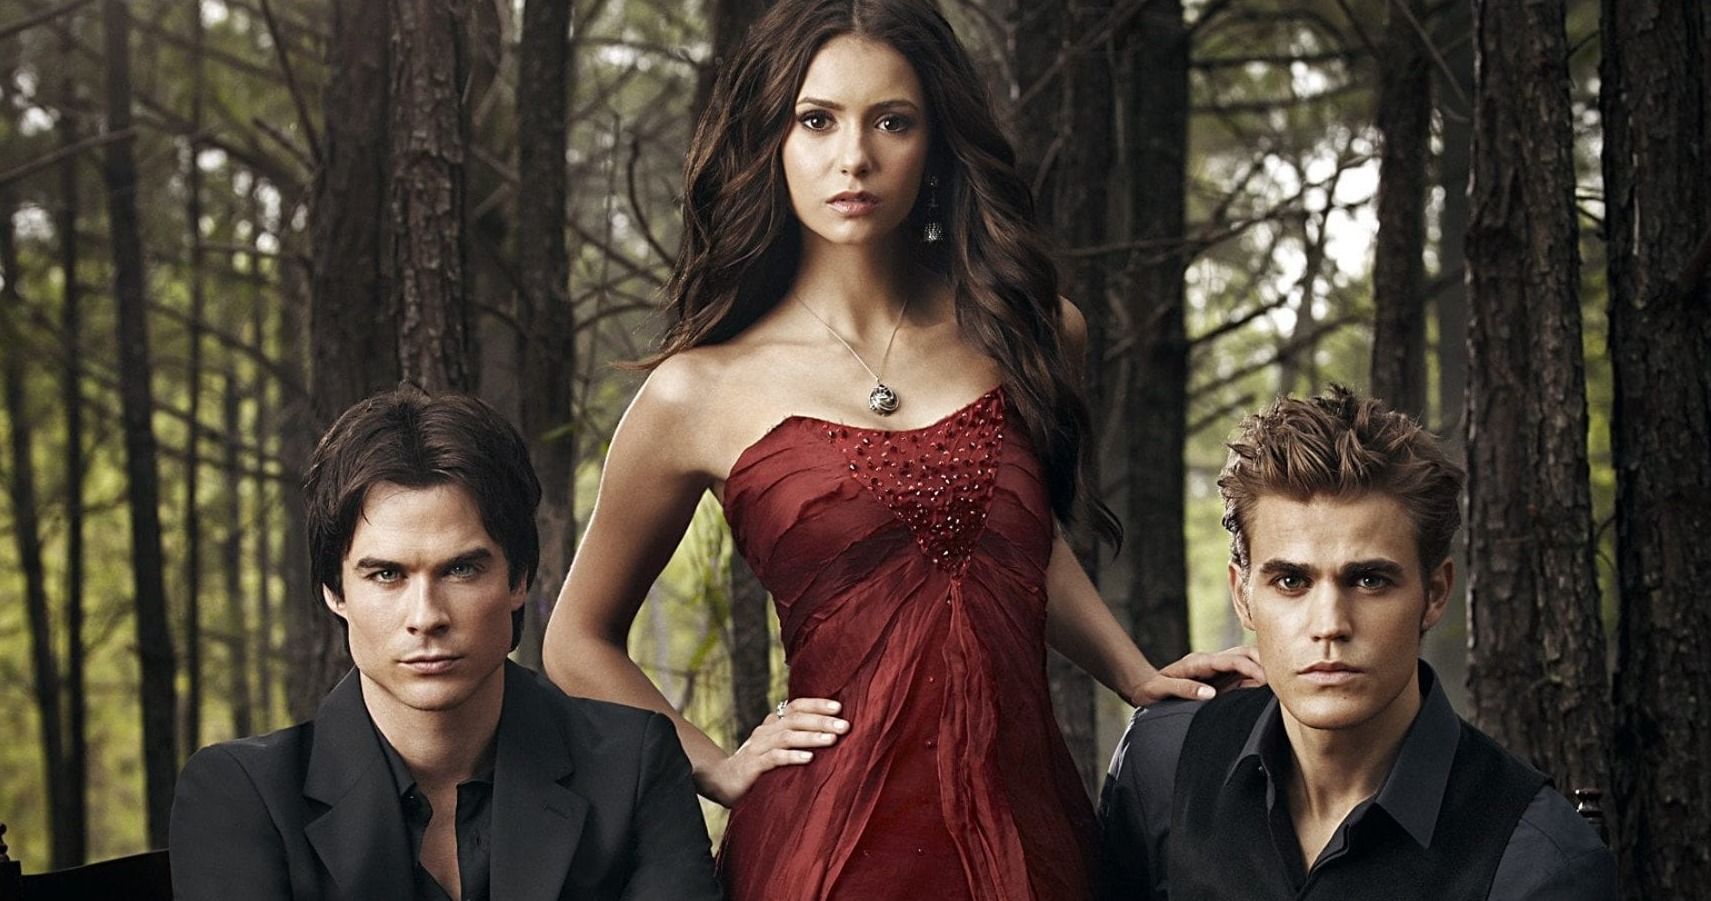 The Vampire Diaries The 5 Best Outfits In The Show (& The 5 Worst)